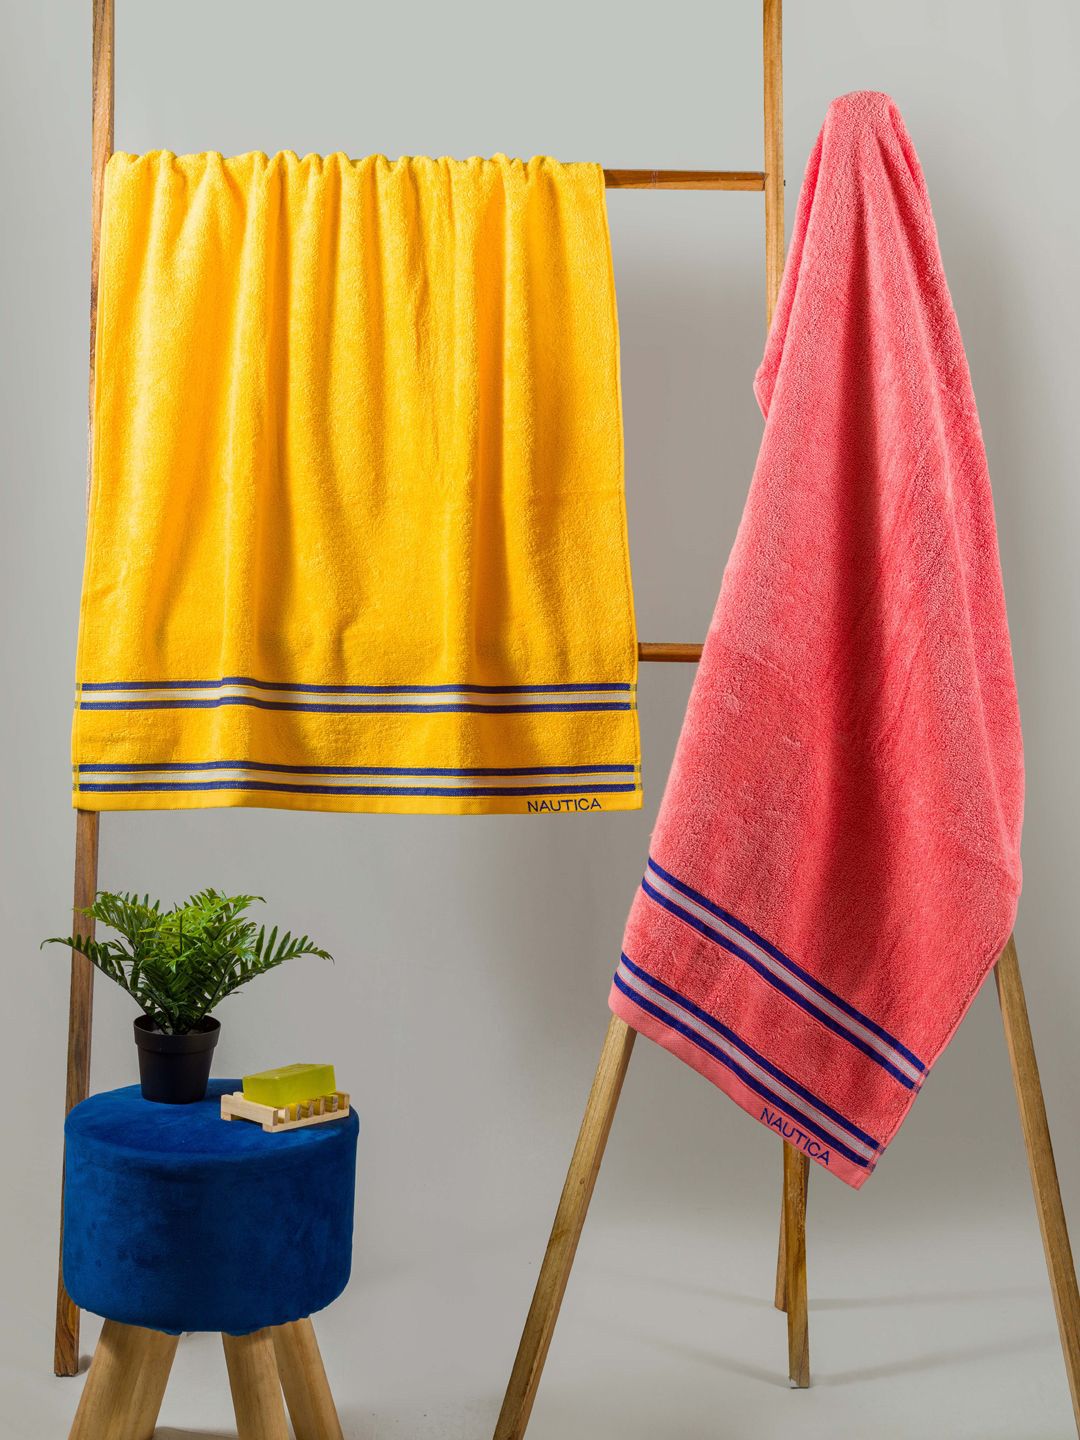 Nautica Set Of 2 Solid 500 GSM Pure Cotton Bath Towels Price in India